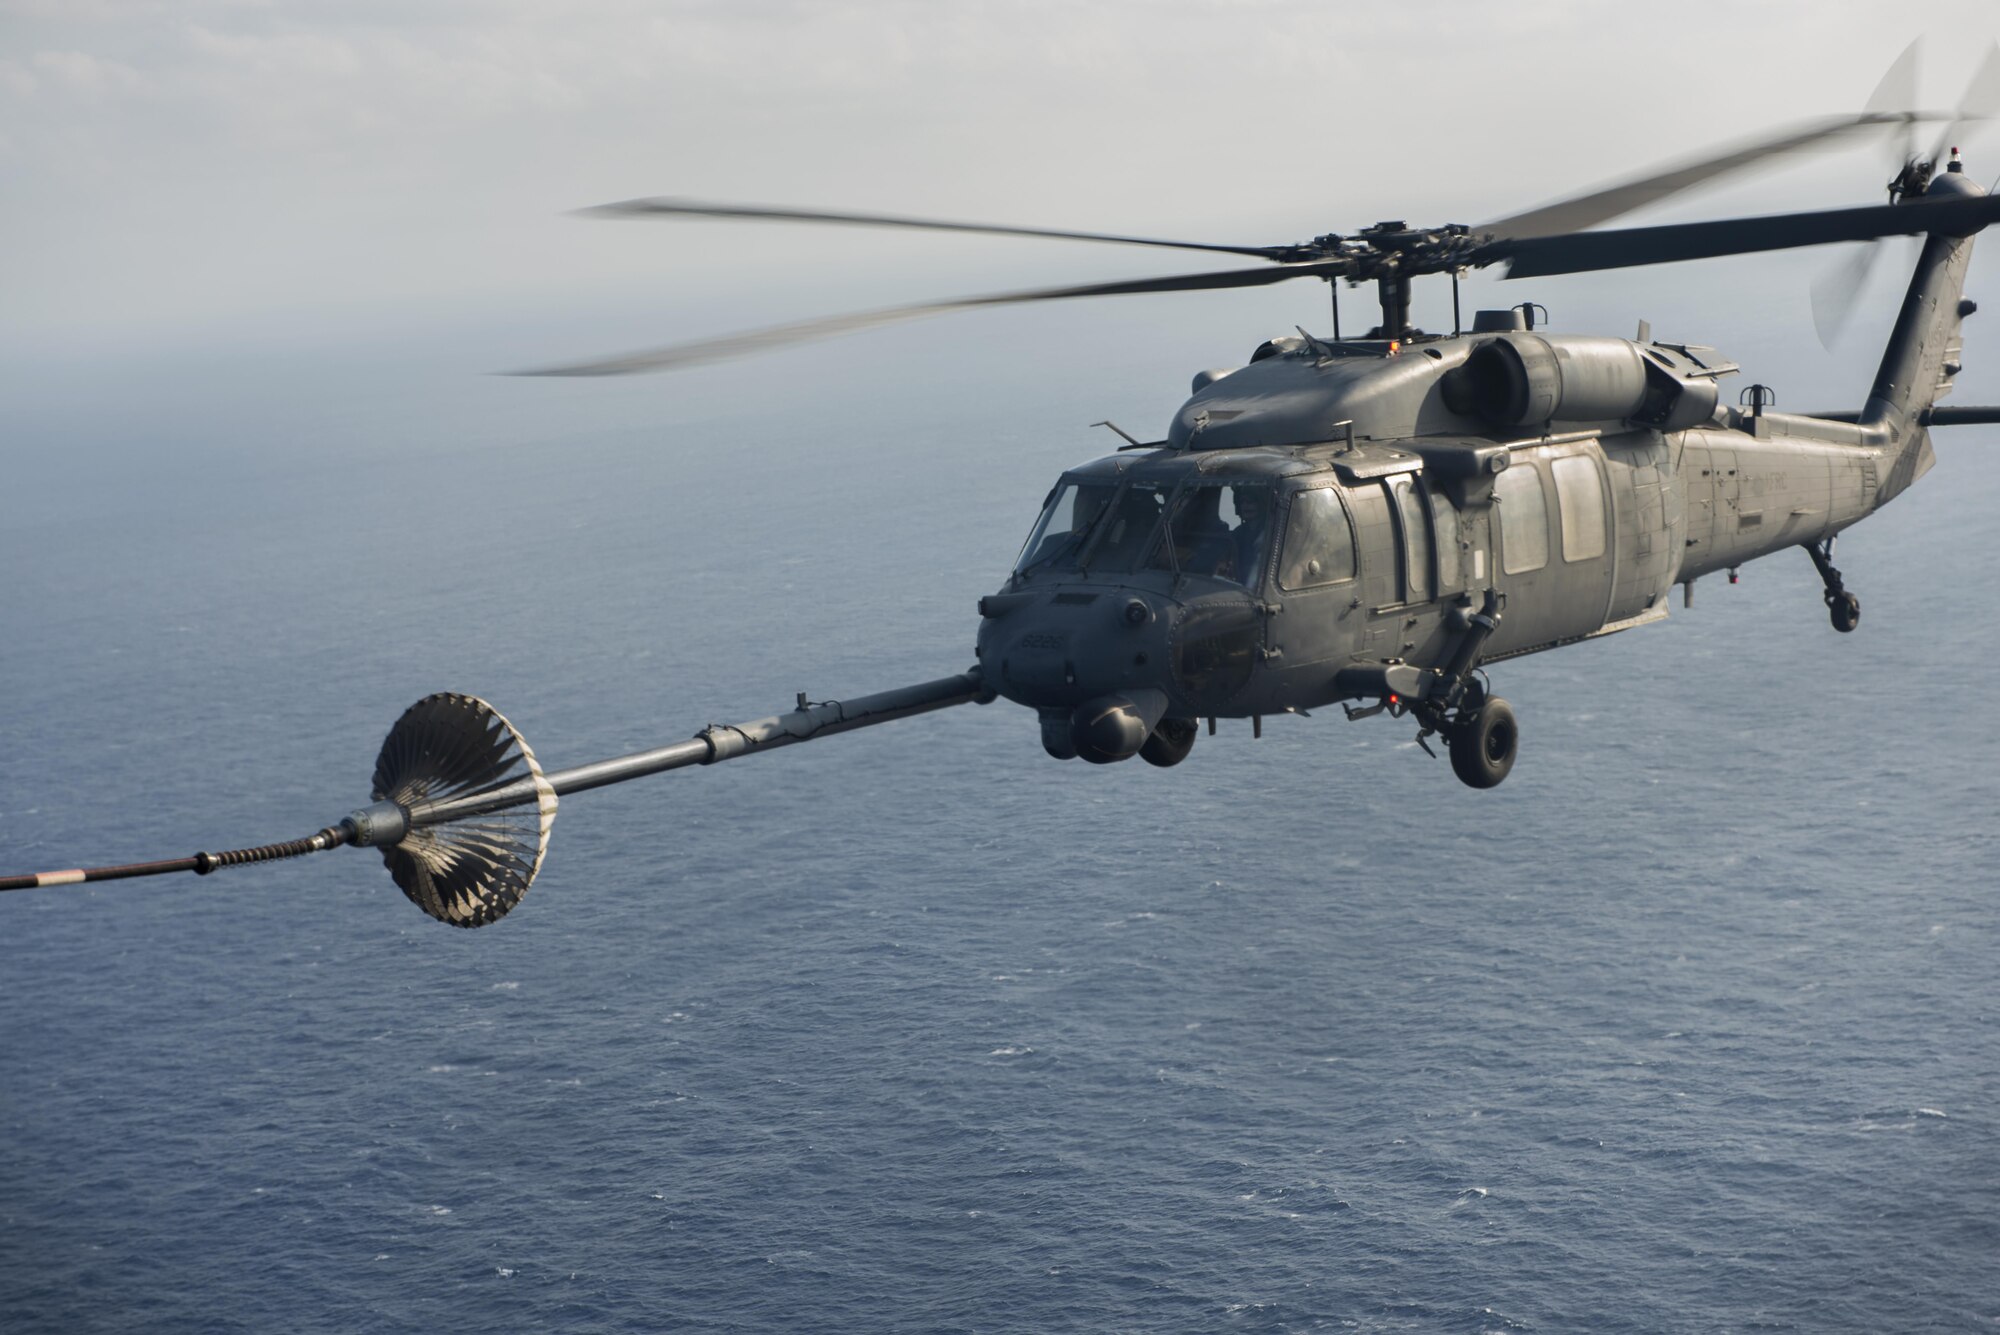 An MC-130H Combat Talon II from the 1st Special Operations Squadron refuels an HH-60 Pave Hawk from the 943rd Rescue Group during Exercise Keen Sword 17 Nov. 7, 2016, near Okinawa, Japan. The 353rd Special Operations Group supported Keen Sword 17 by providing a refueling point for U.S. and Japan Air Self-Defense Force HH-60 Pave Hawks. (U.S. Air Force photo by Airman 1st Class Corey M. Pettis)